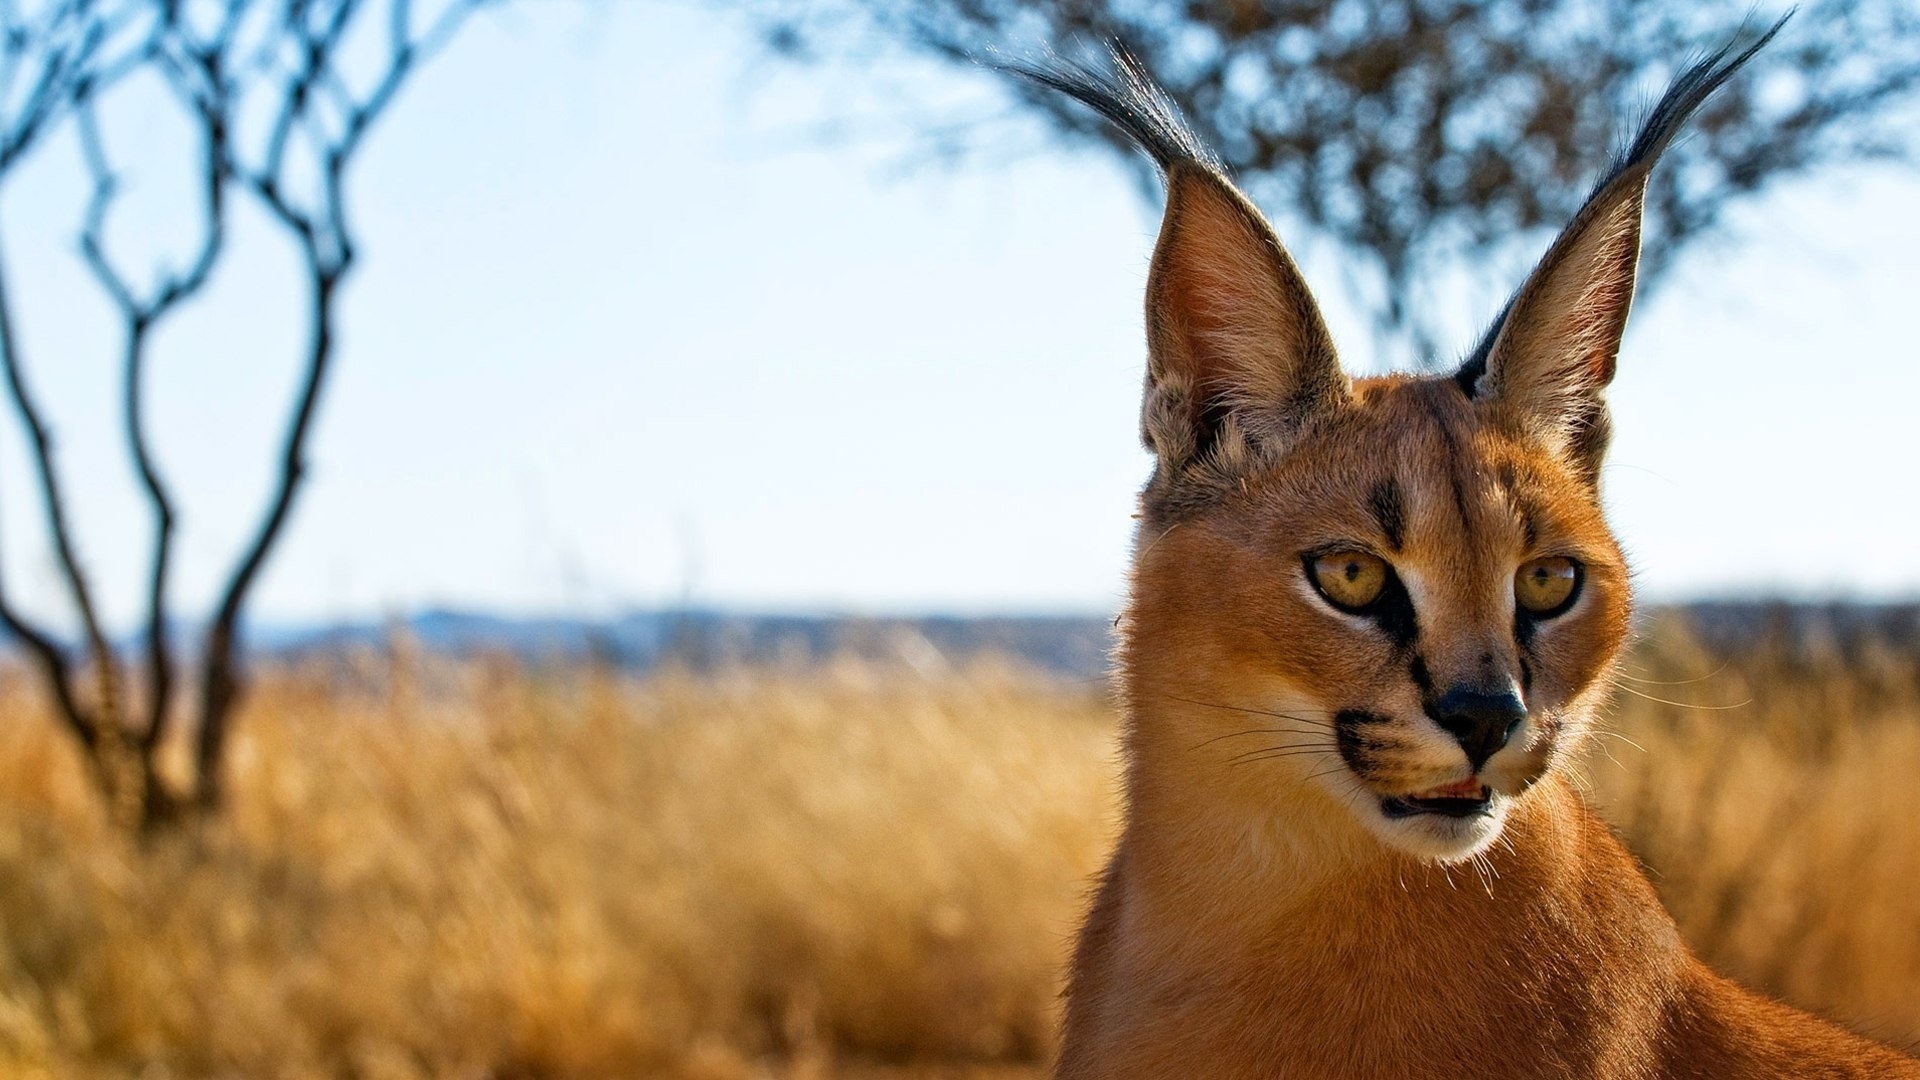 Caracal wallpapers, Stunning visuals, Impressive imagery, High-quality resolution, 1920x1080 Full HD Desktop